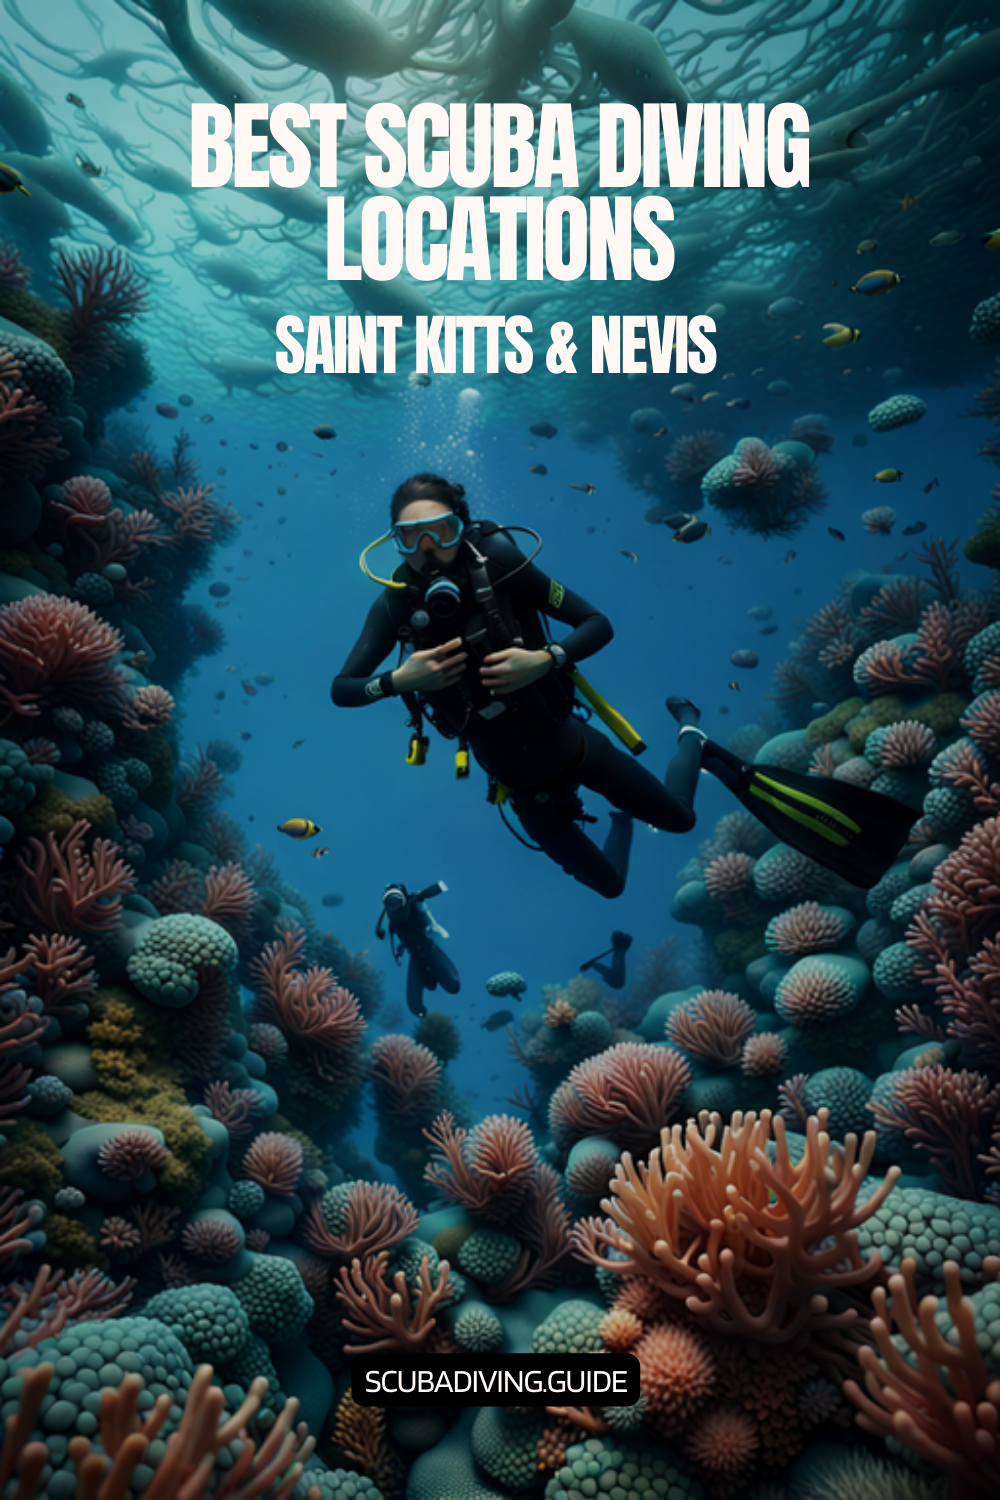 Scuba Diving Locations in Saint Kitts & Nevis